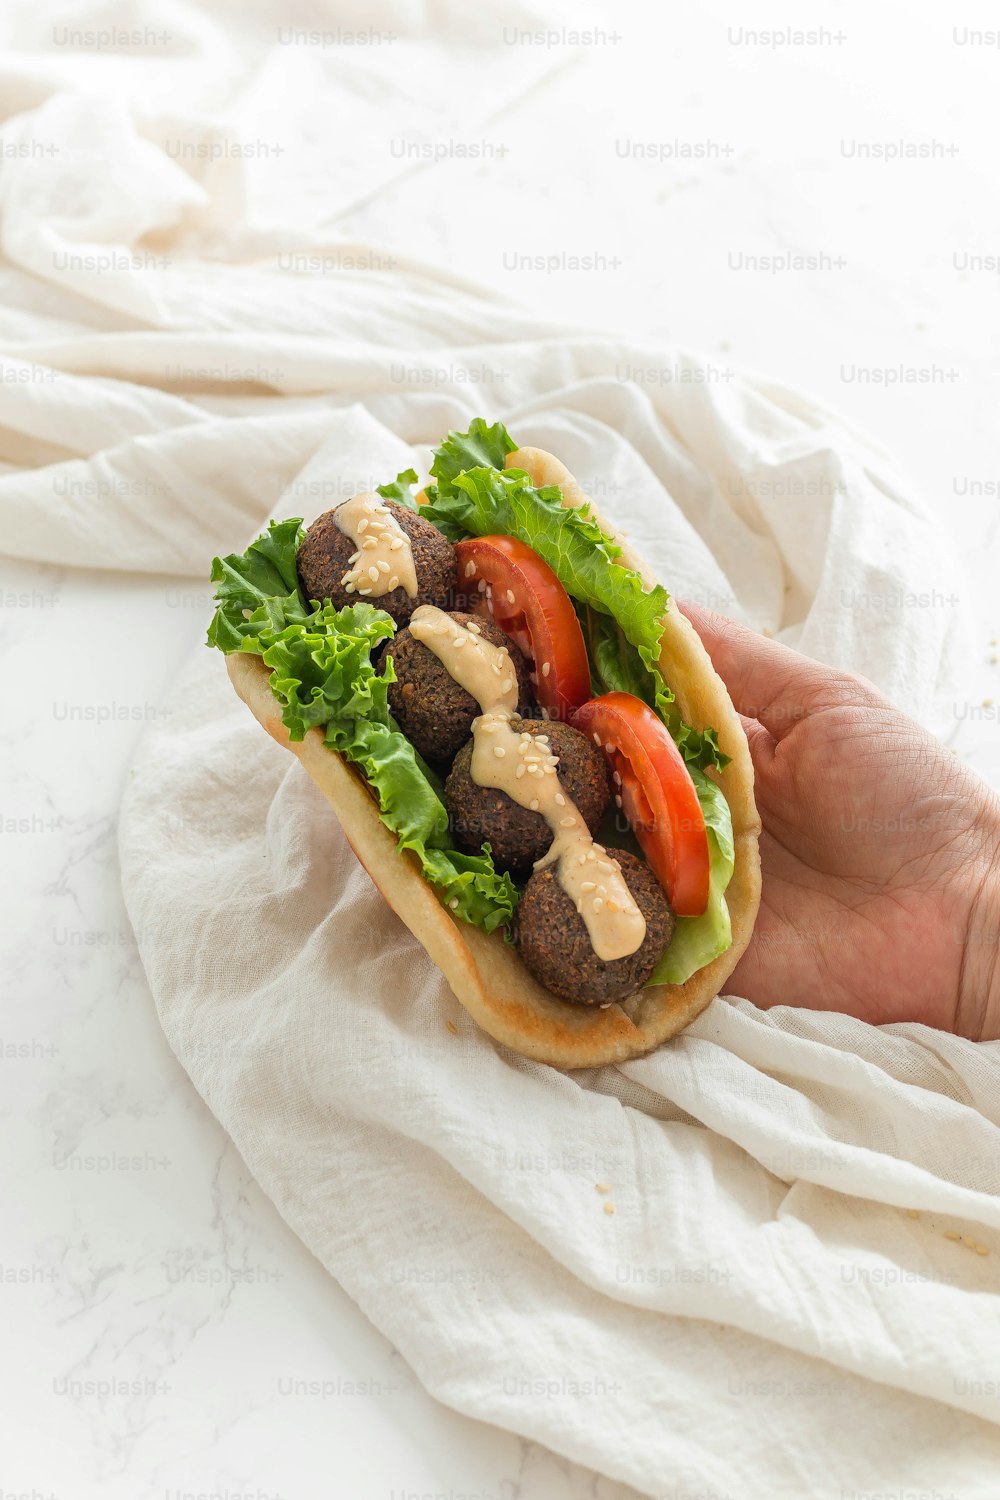 a hand holding a sandwich with meat, lettuce and tomatoes